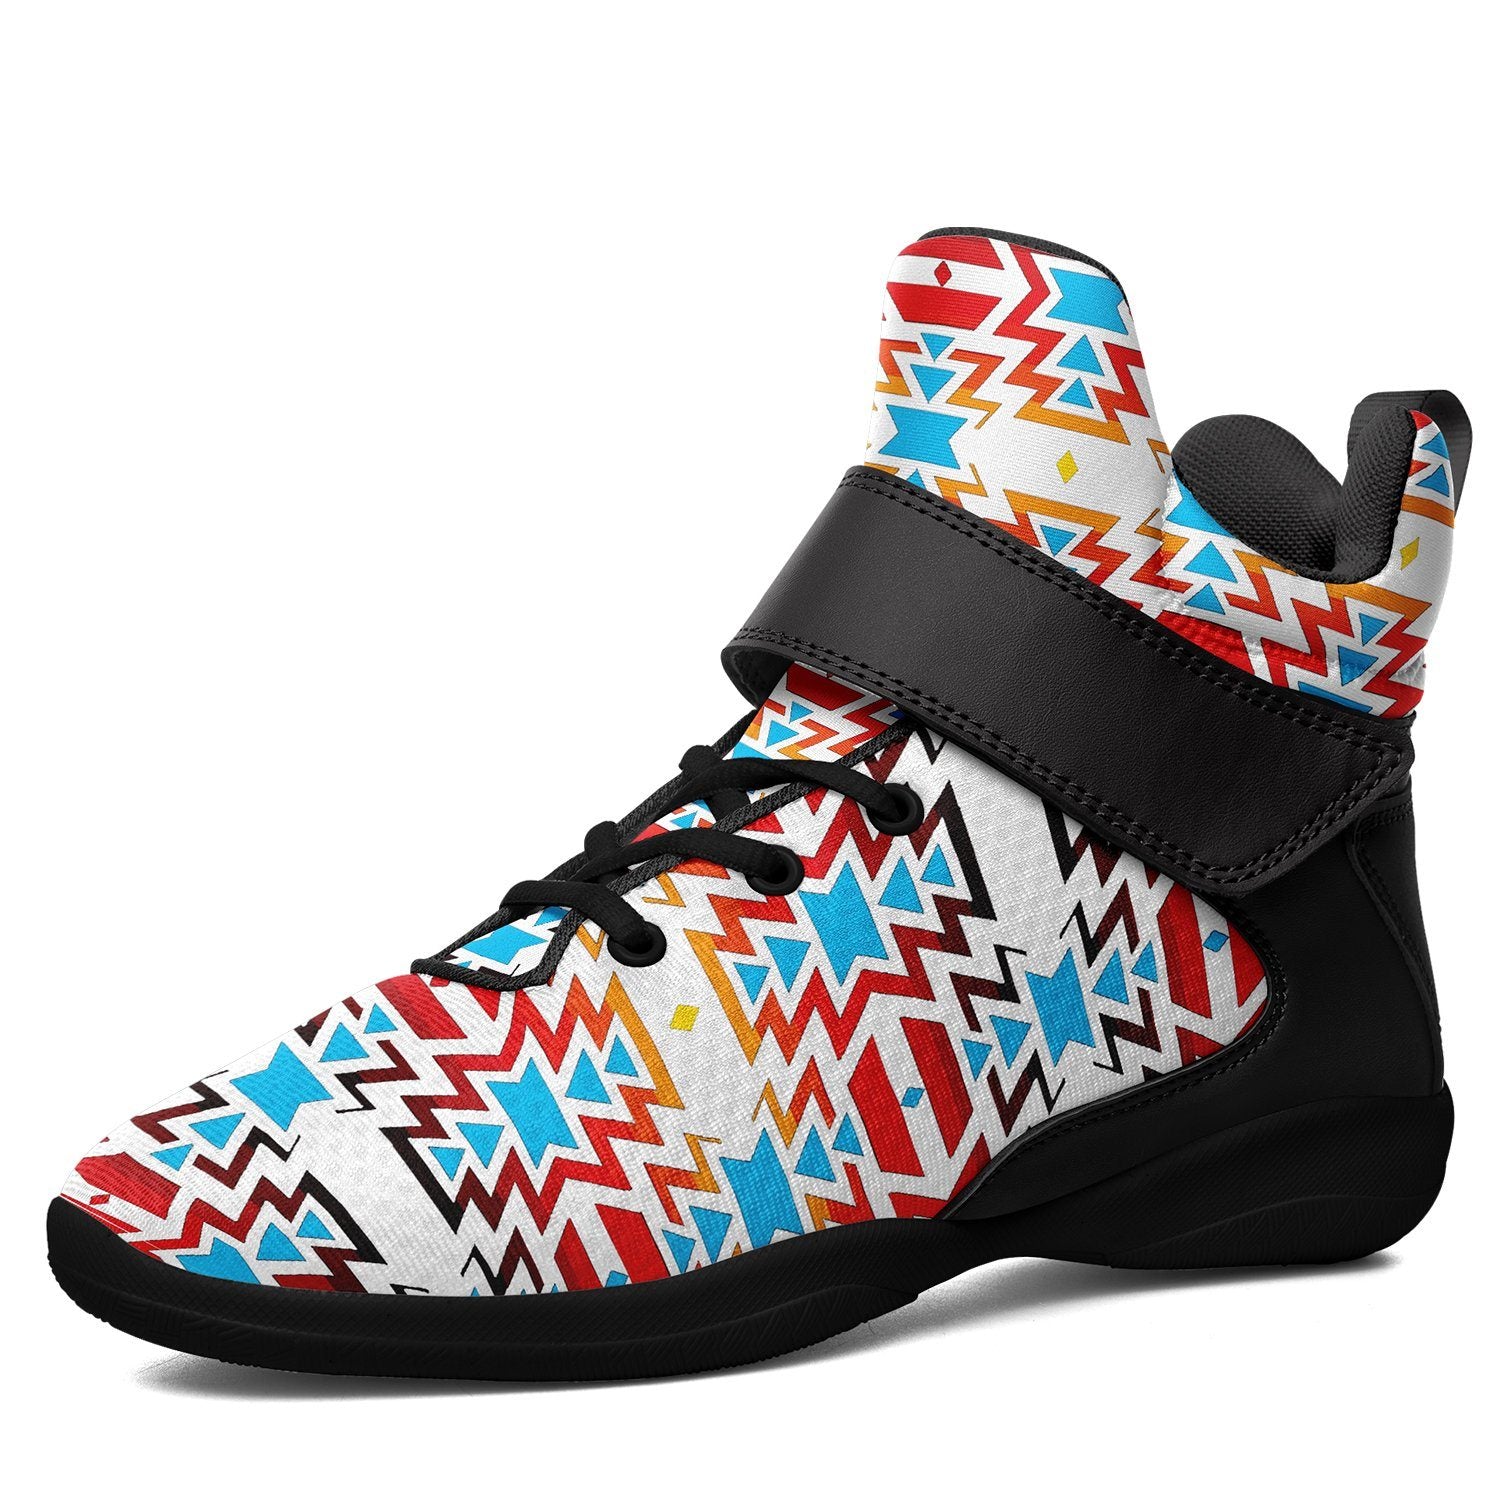 Fire Colors and Sky Ipottaa Basketball / Sport High Top Shoes 49 Dzine US Women 4.5 / US Youth 3.5 / EUR 35 Black Sole with Black Strap 